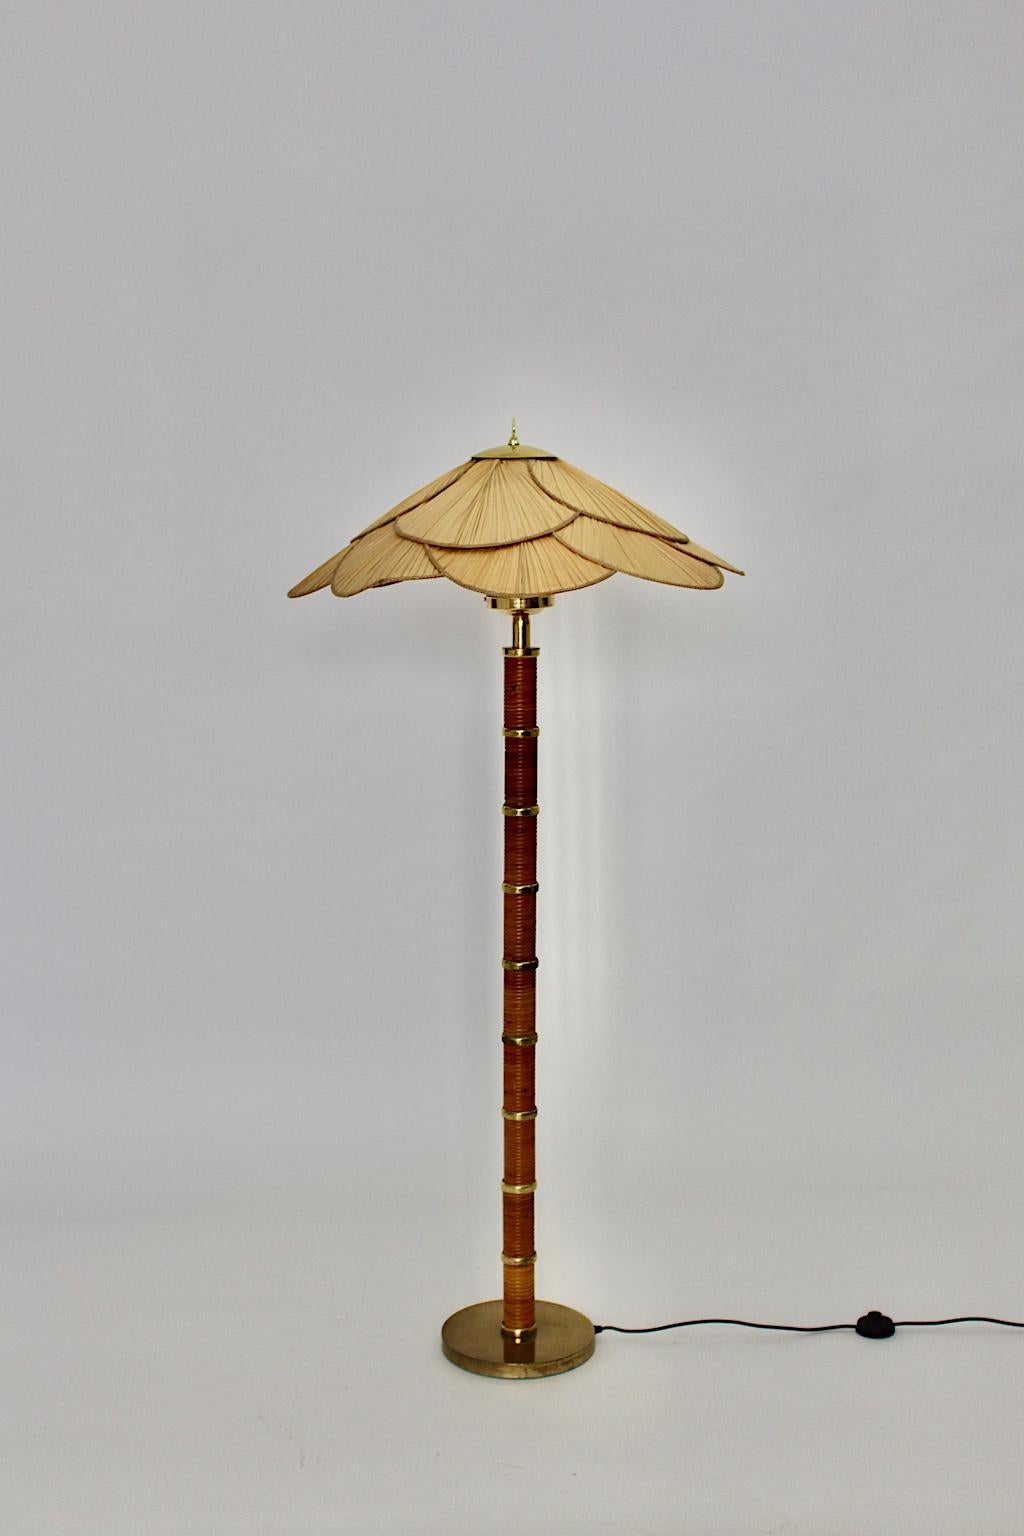 Modern vintage floor lamp from rattan, brass and opal glass 1970s Italy.
A classy floor lamp with a rattan stem, brass details and an opal glass shade with palm leaves shade in an amazing form.
The lollipop-like opal glass, sitting on the top,